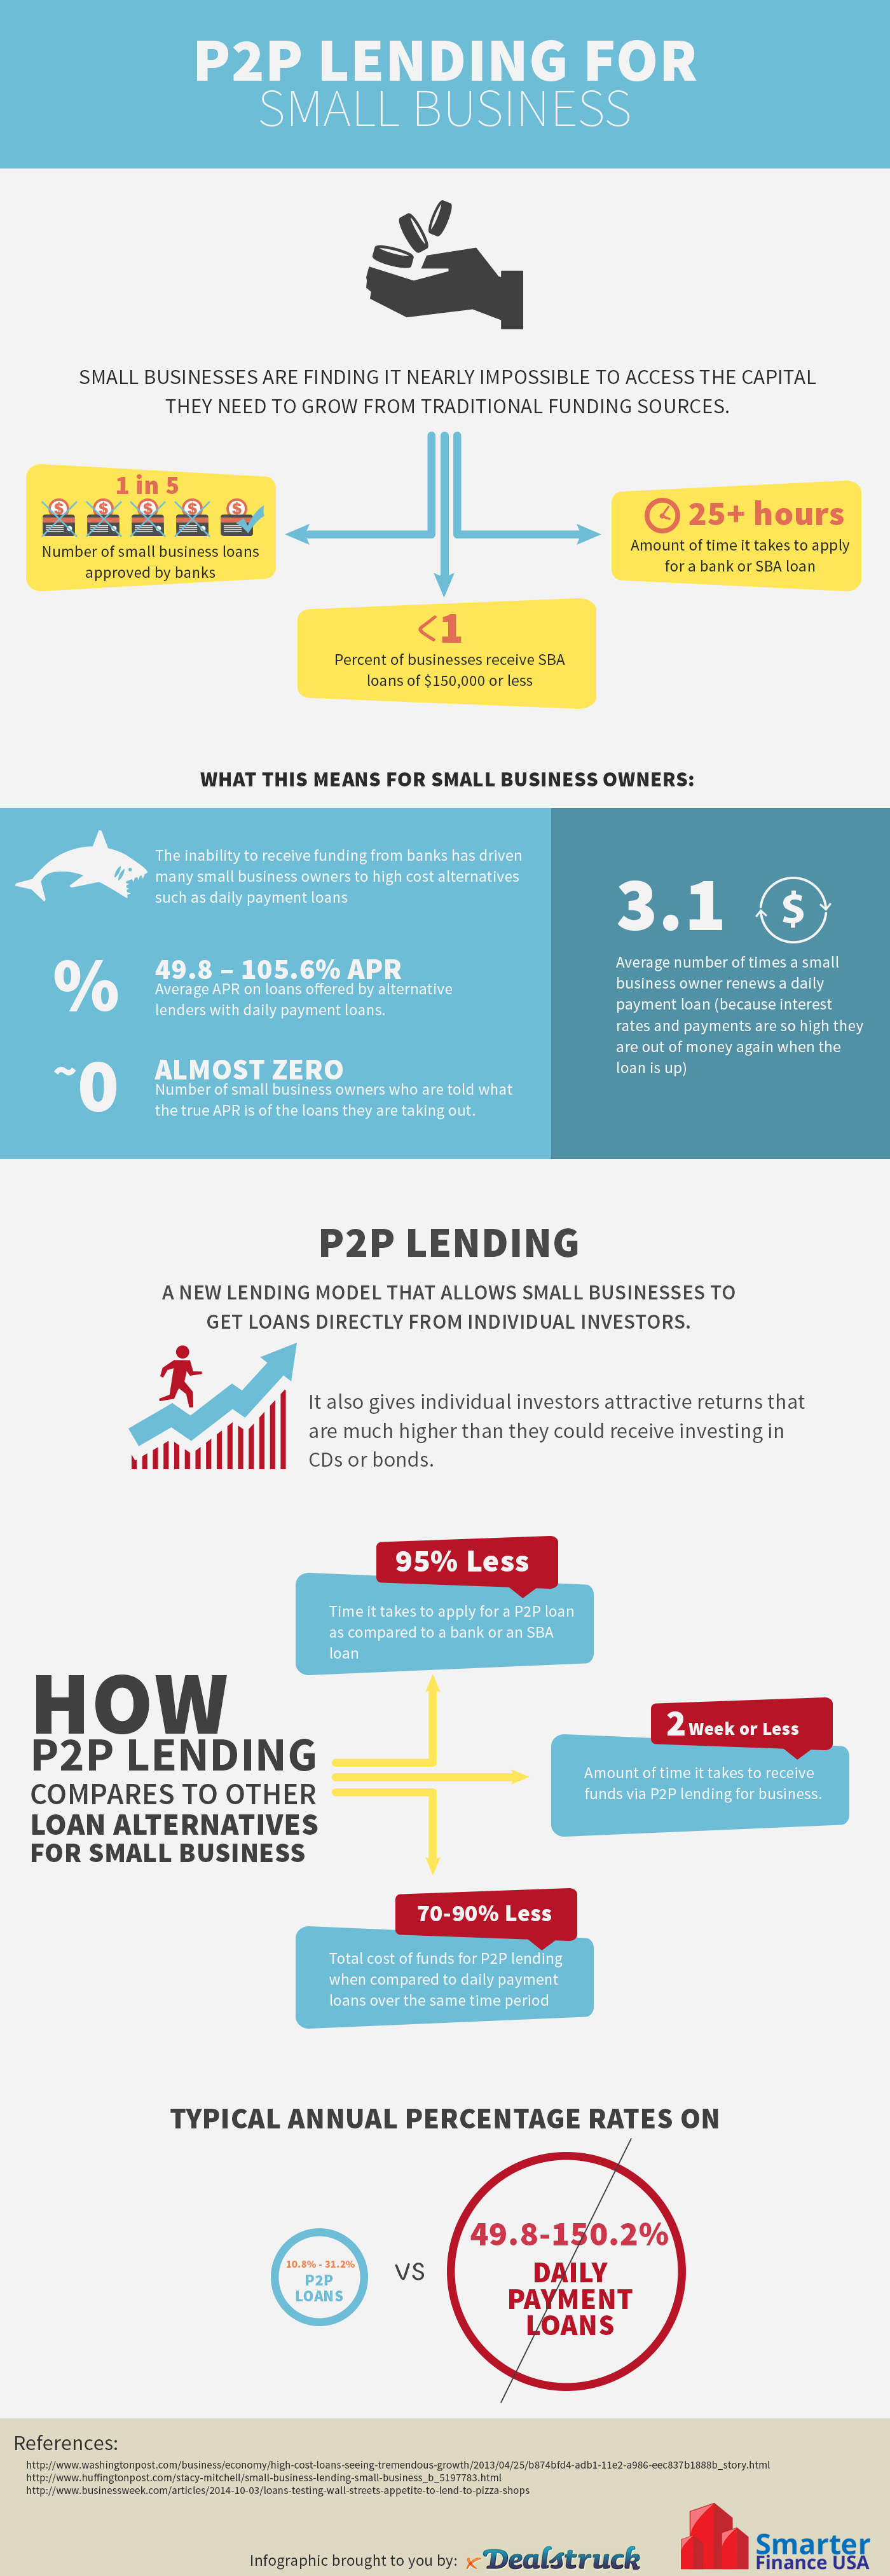 P2p-loans-small-business-infographic